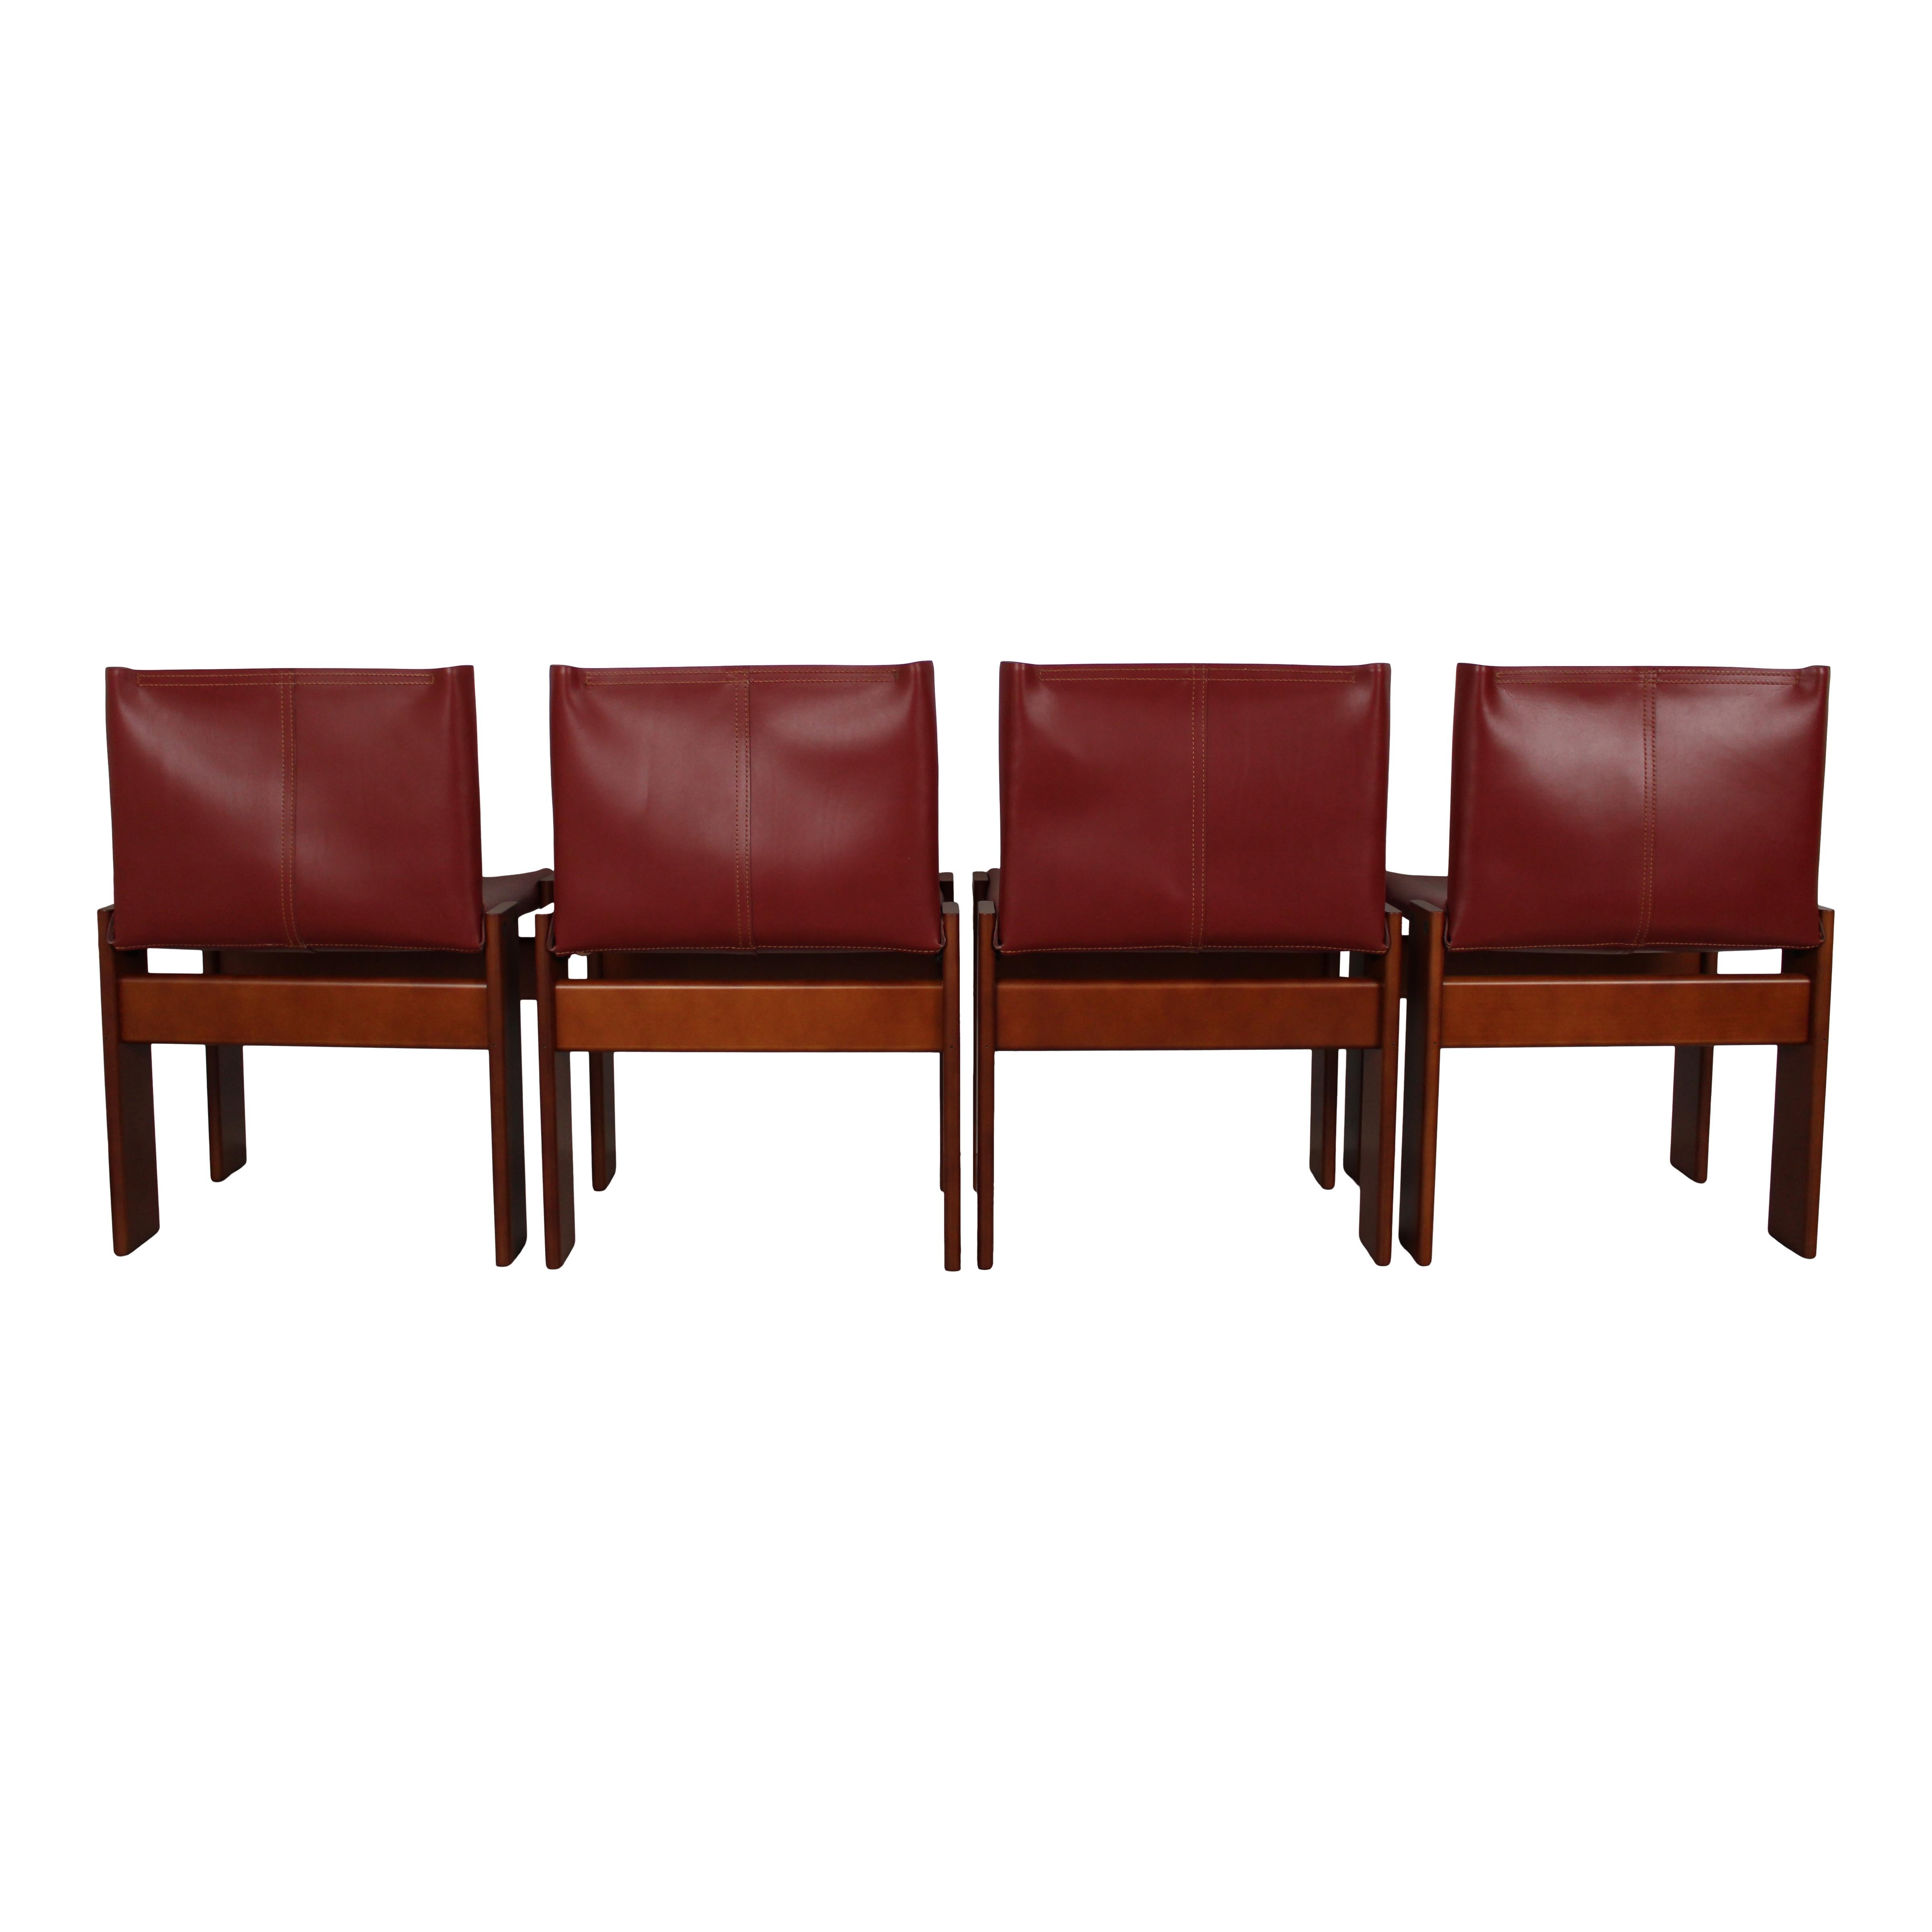 Afra & Tobia Scarpa English Red  Leather Monk Dining Chair for Molteni, Set of 4 For Sale 1